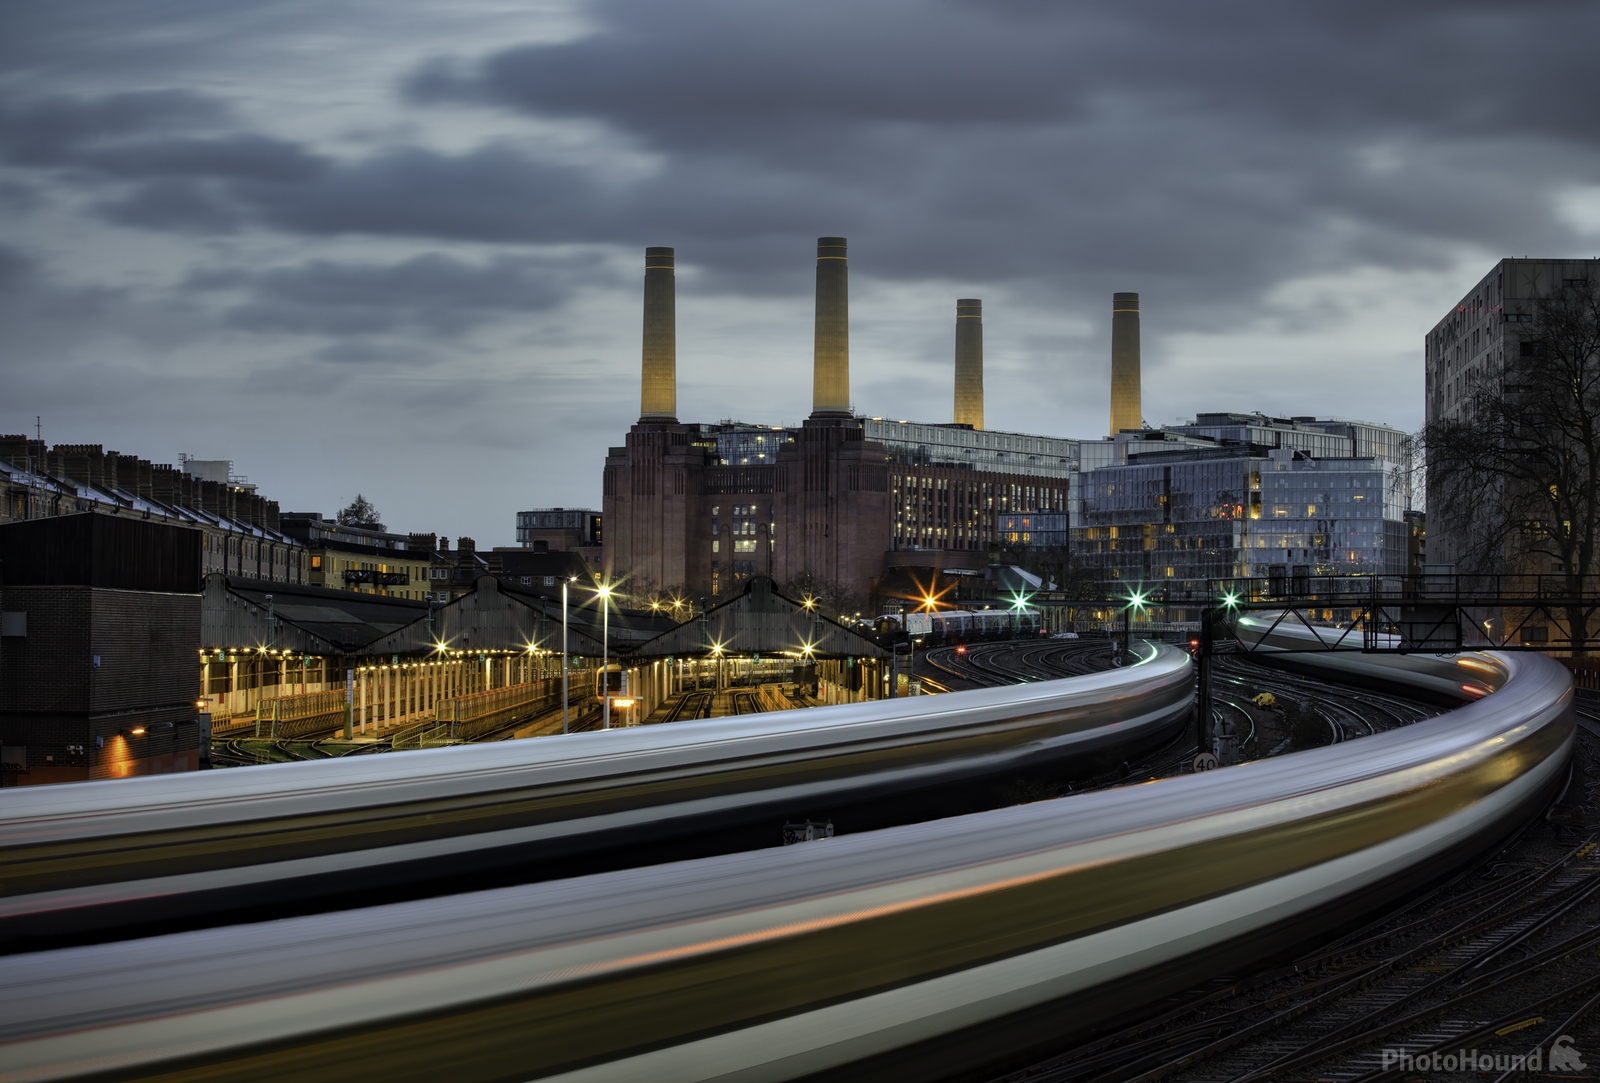 Image of Battersea Power Station from Ebury Bridge by Paul James